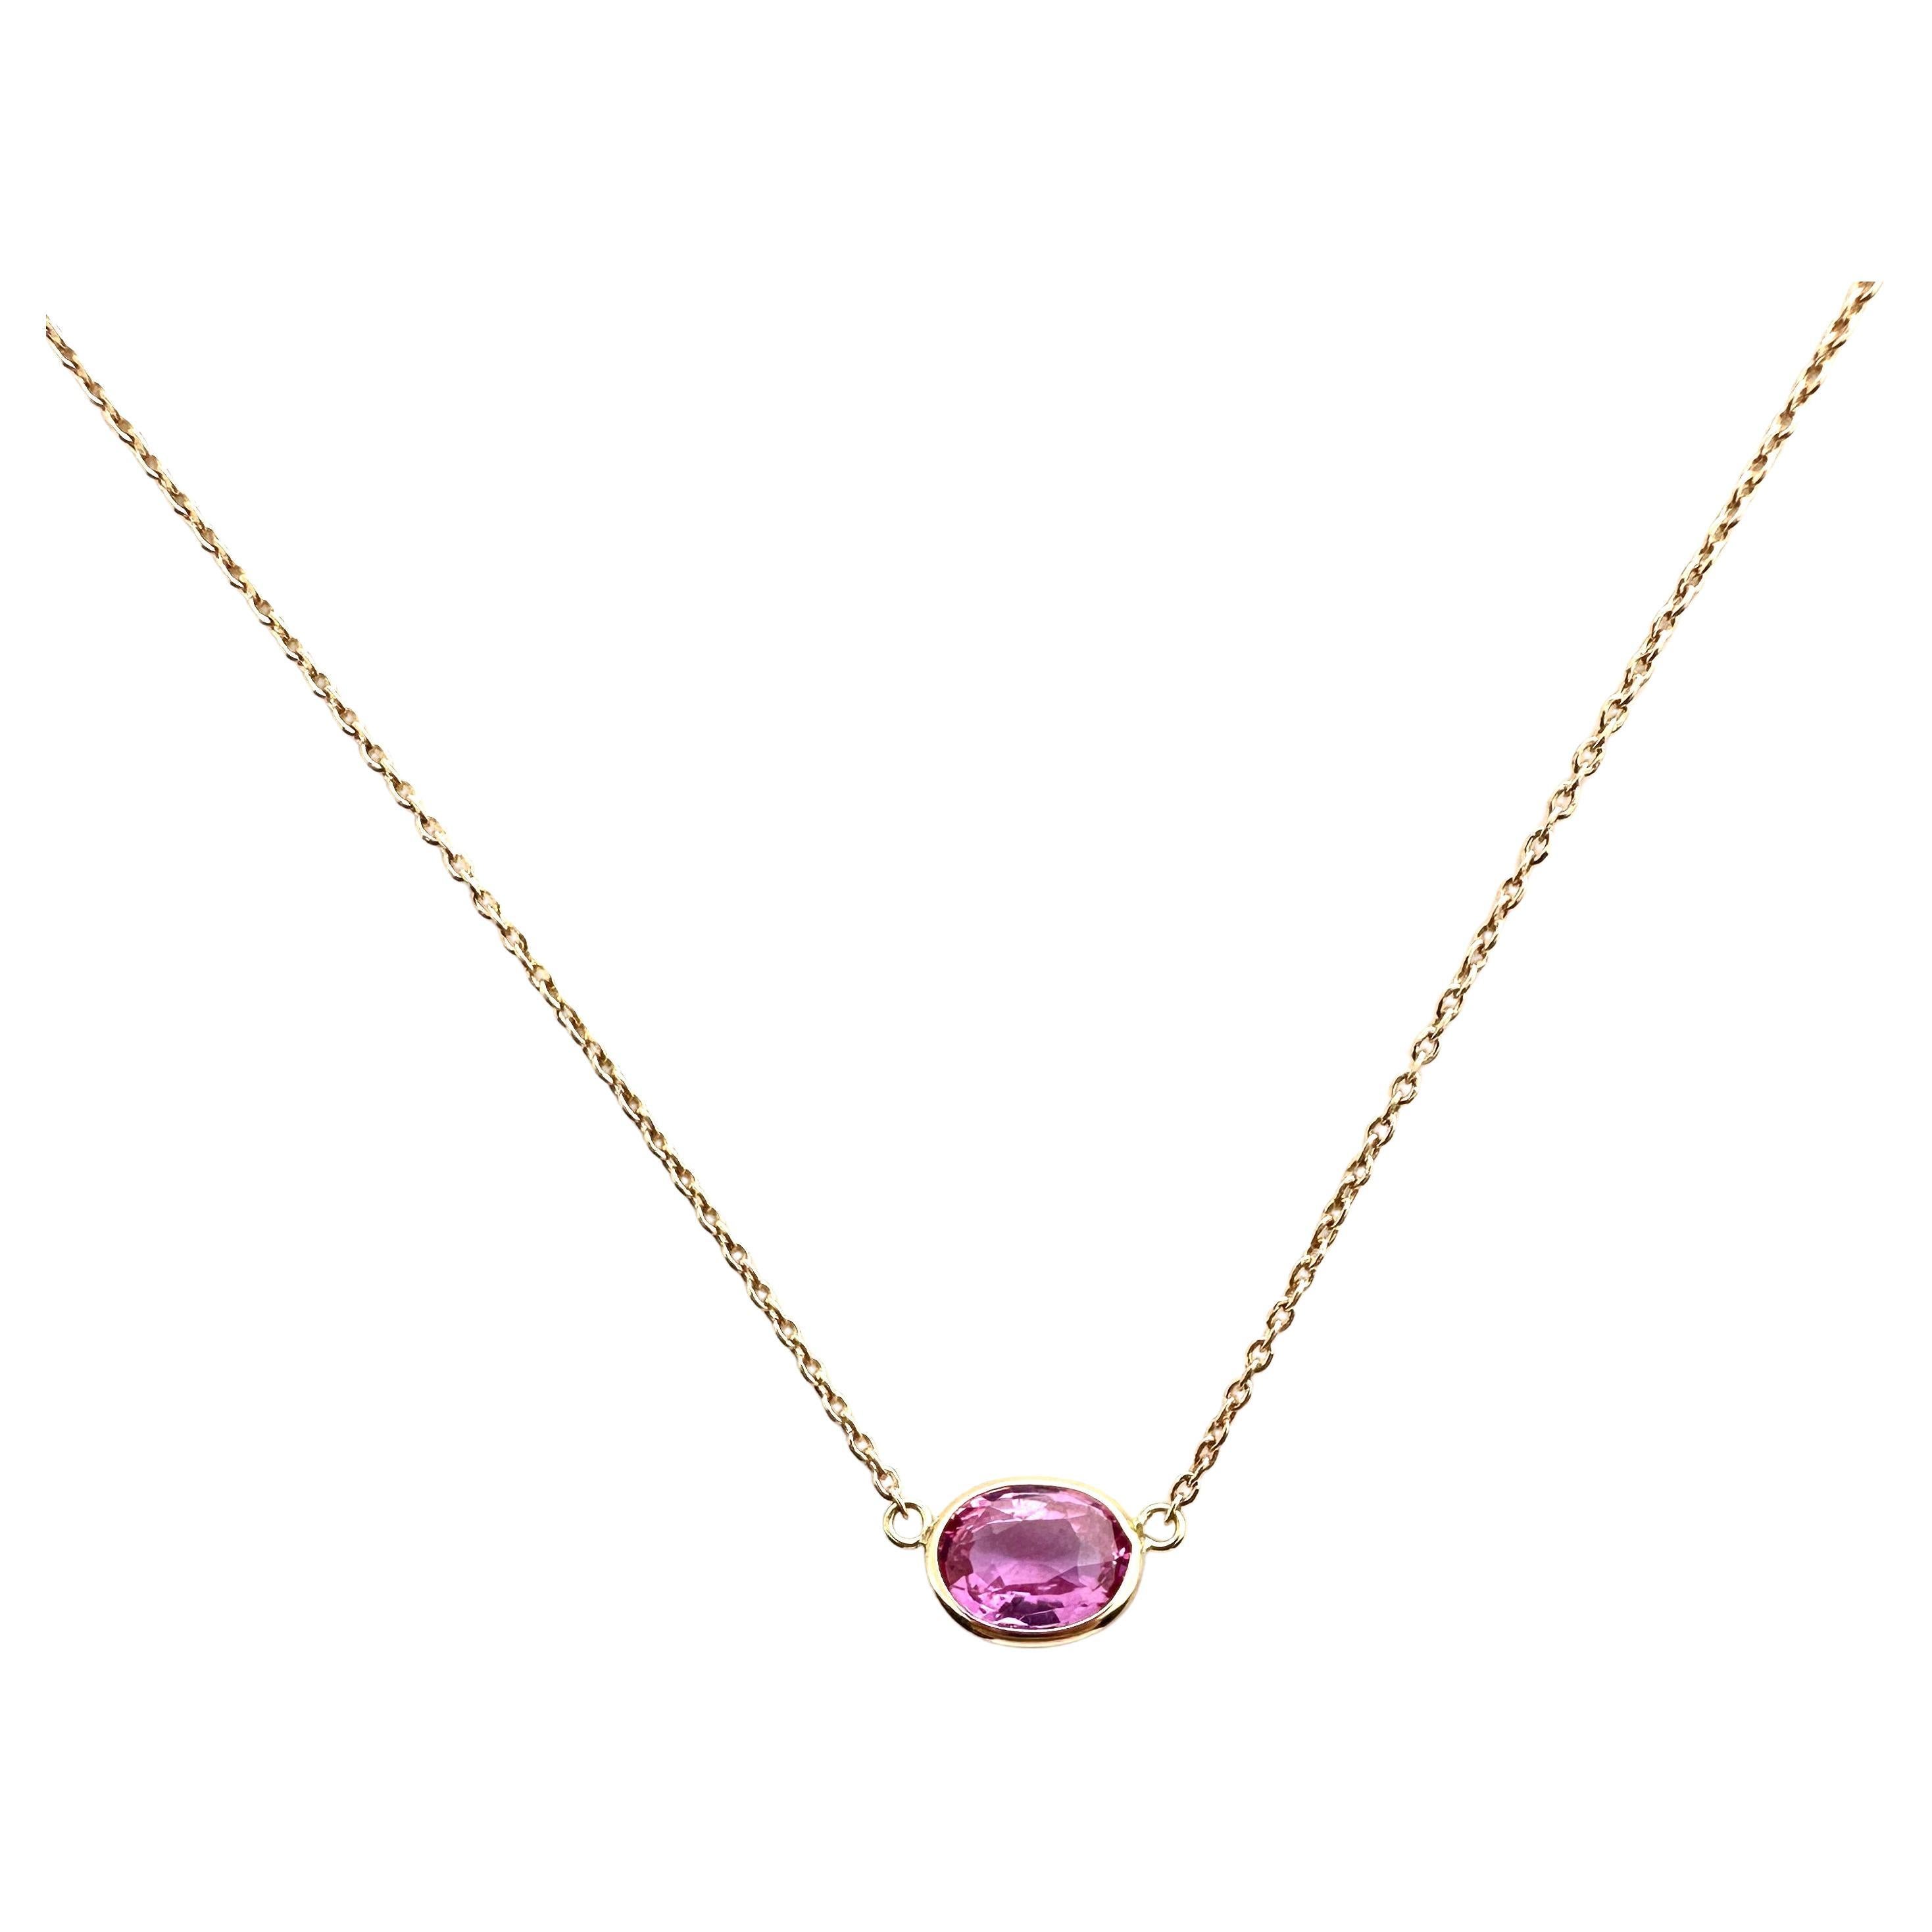 1.43 Carat Pink Sapphire Oval & Fashion Necklaces In 14K Rose Gold For Sale